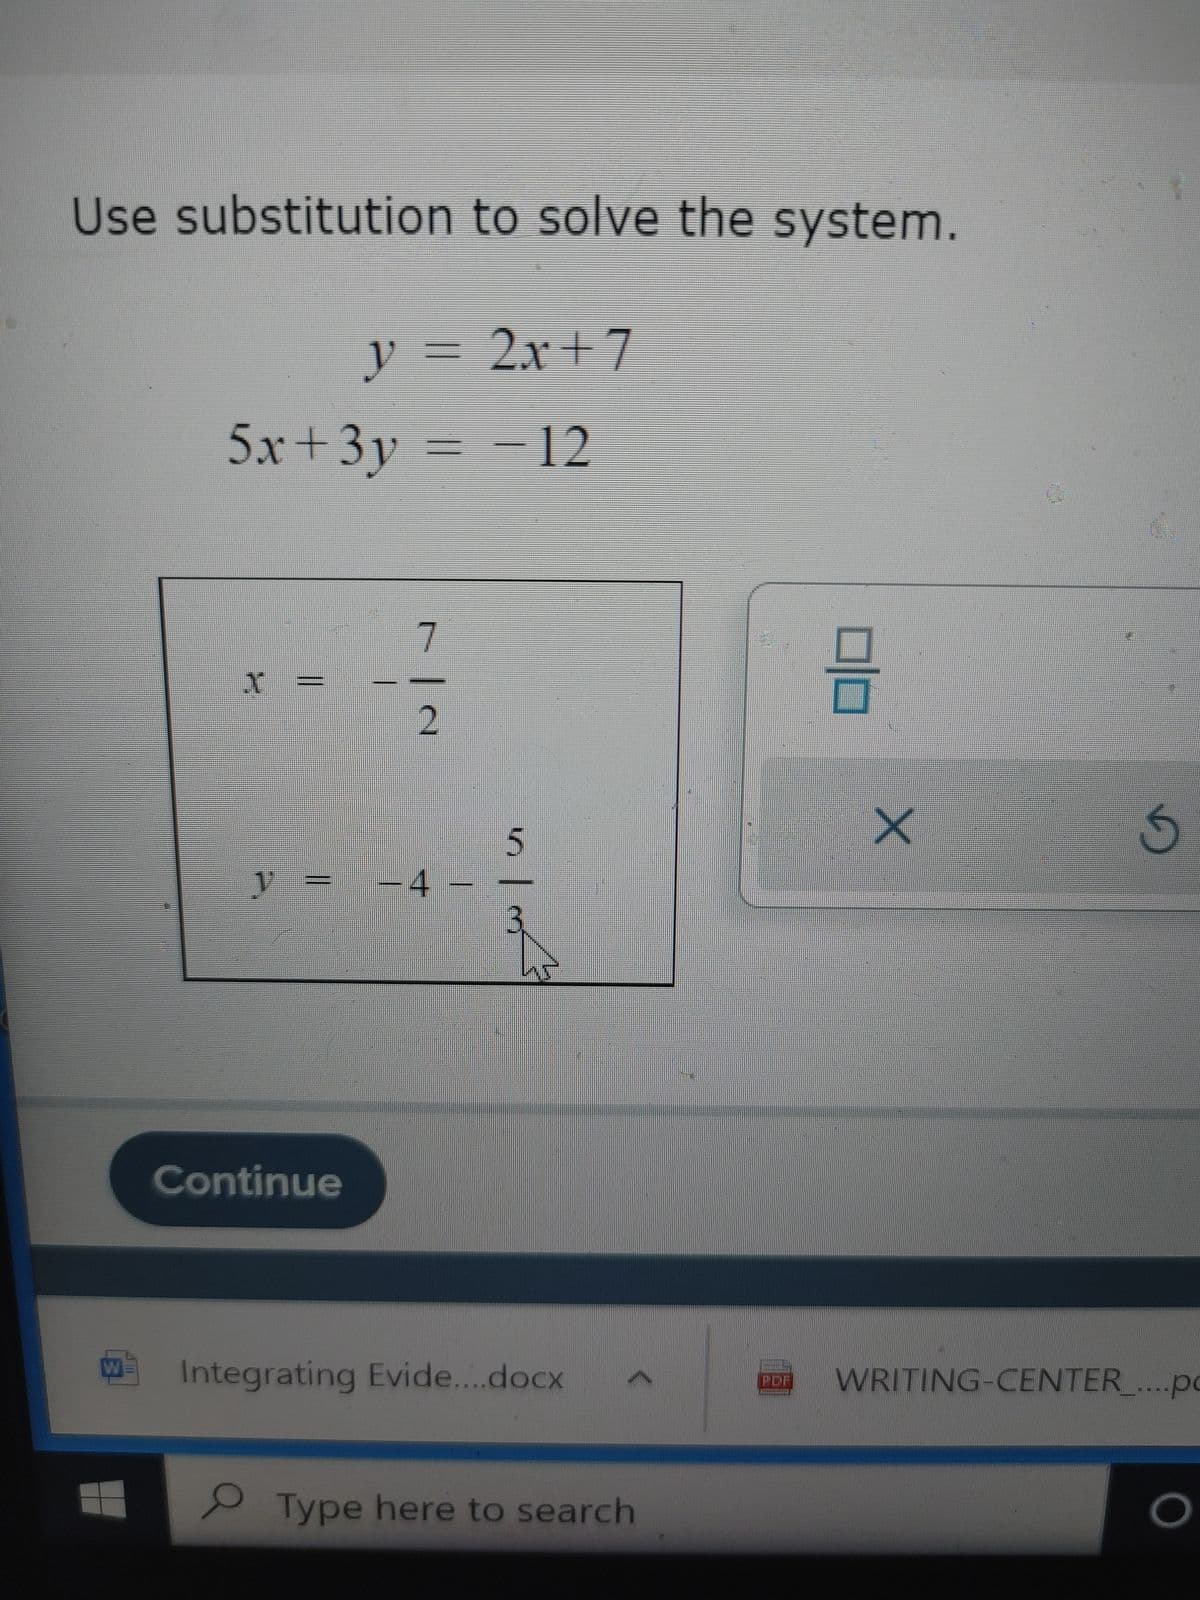 Use substitution to solve the system.
W
y = 2x+7
5x+3y = -12
Continue
7
7
2
-4
5
Integrating Evide....docx
Type here to search
20
X
Ś
POF WRITING-CENTER_....po
O